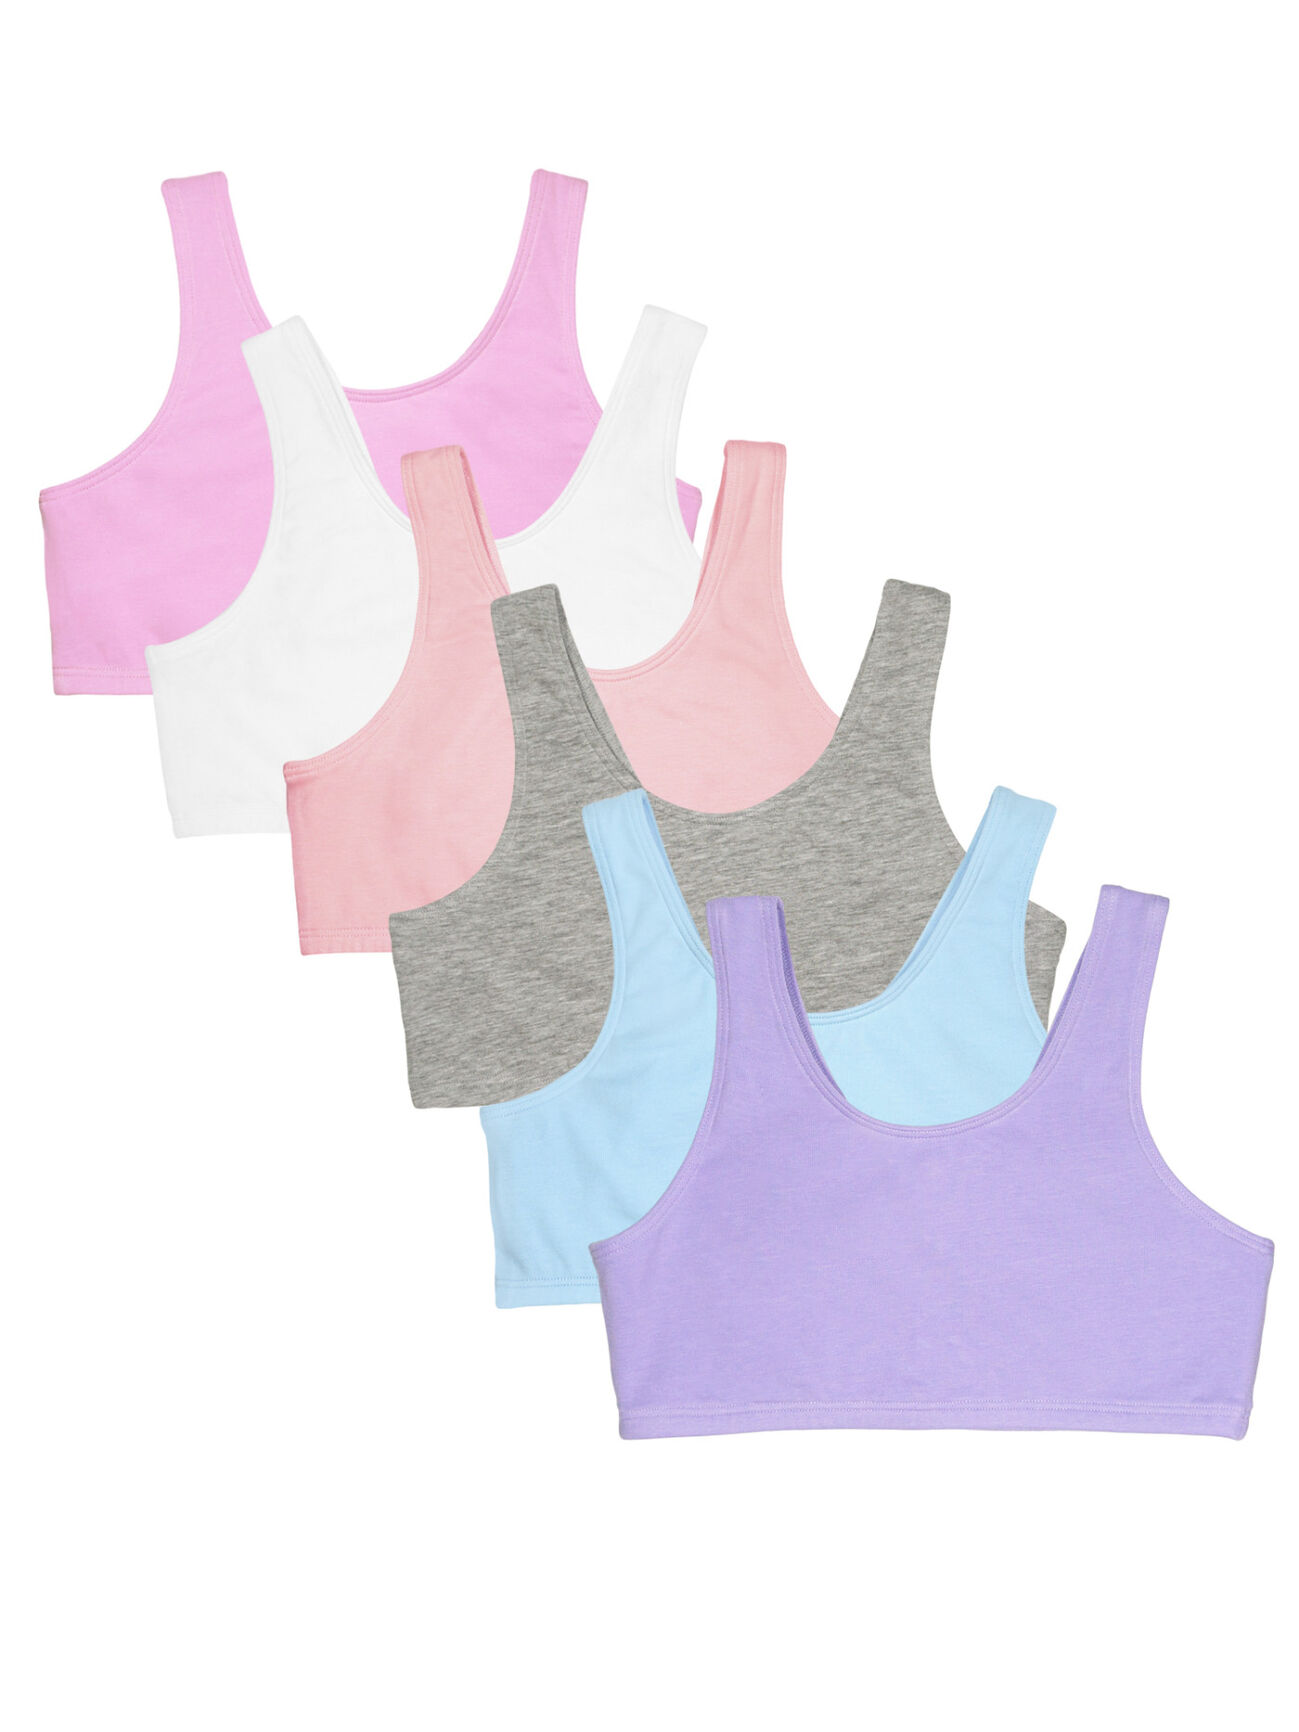 Fruit of the Loom Girls Seamless Trainer Bra with Removable Modesty Pads 3  Pack Multi Leo/Grey Heather/White 28